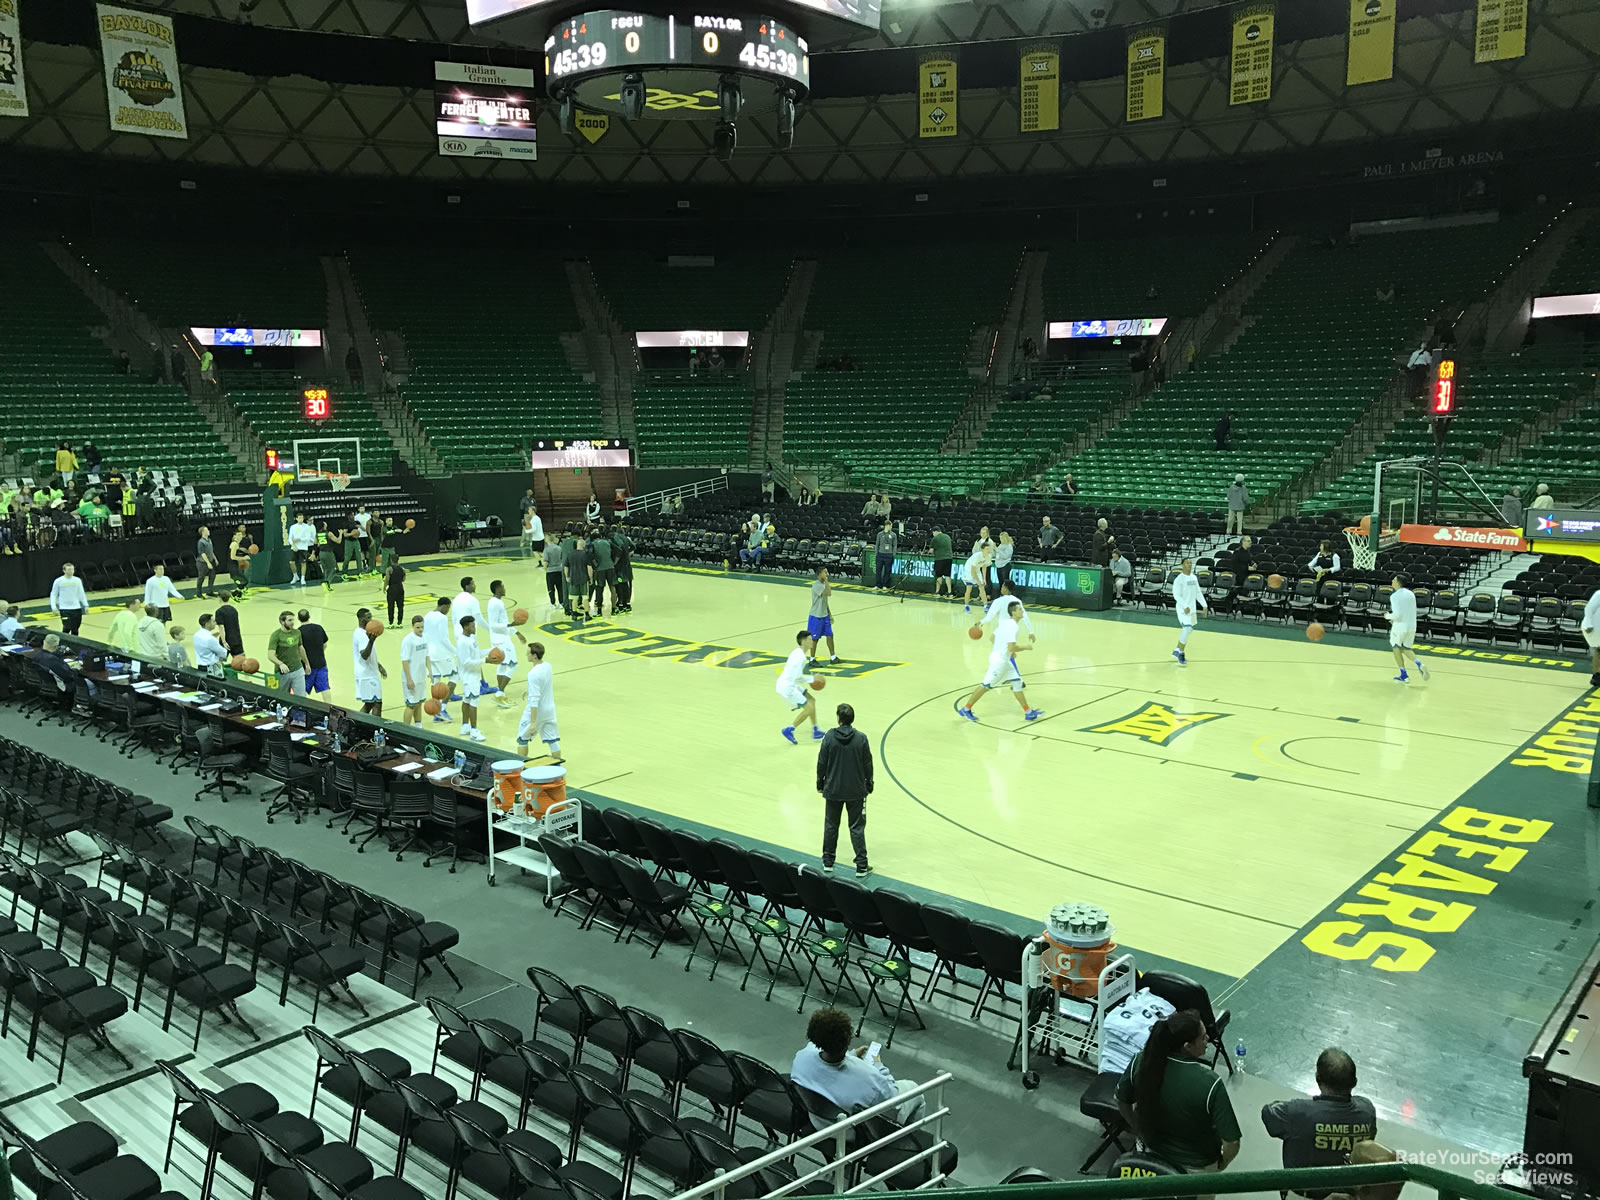 section 110, row 10 seat view  - ferrell center